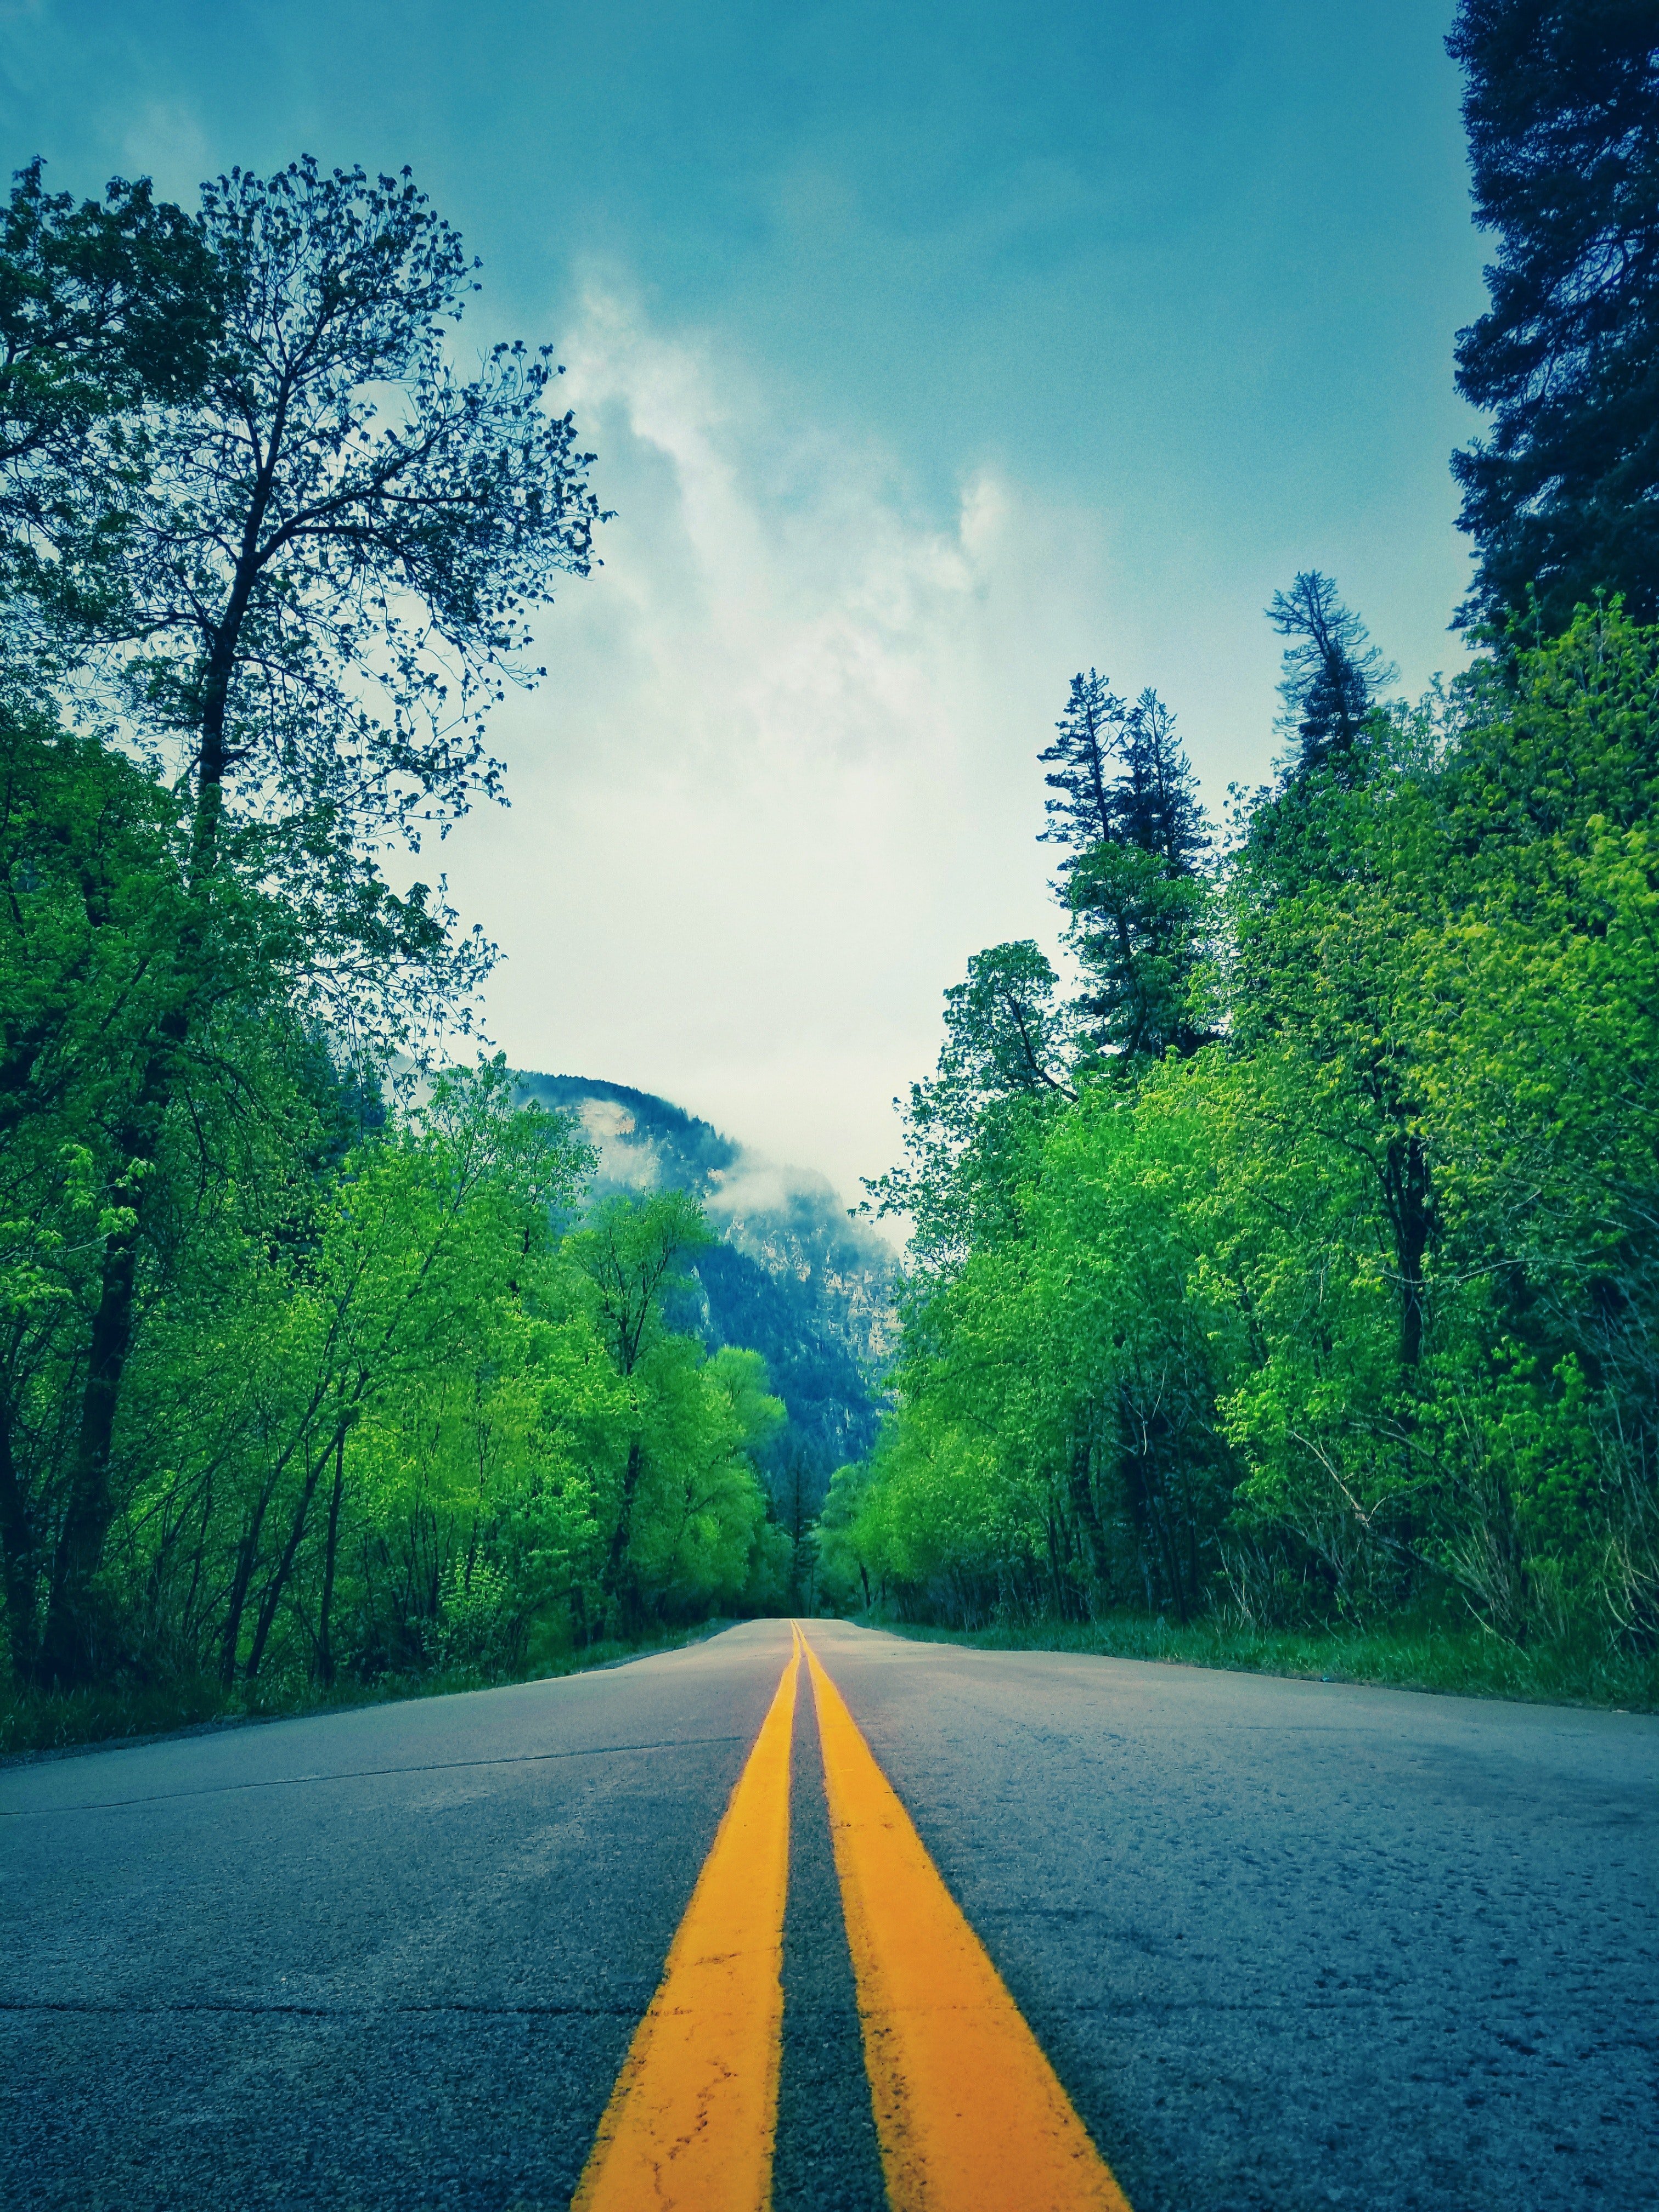 Pictured - An image of a narrow road and green leafed trees | Source: Pexels 